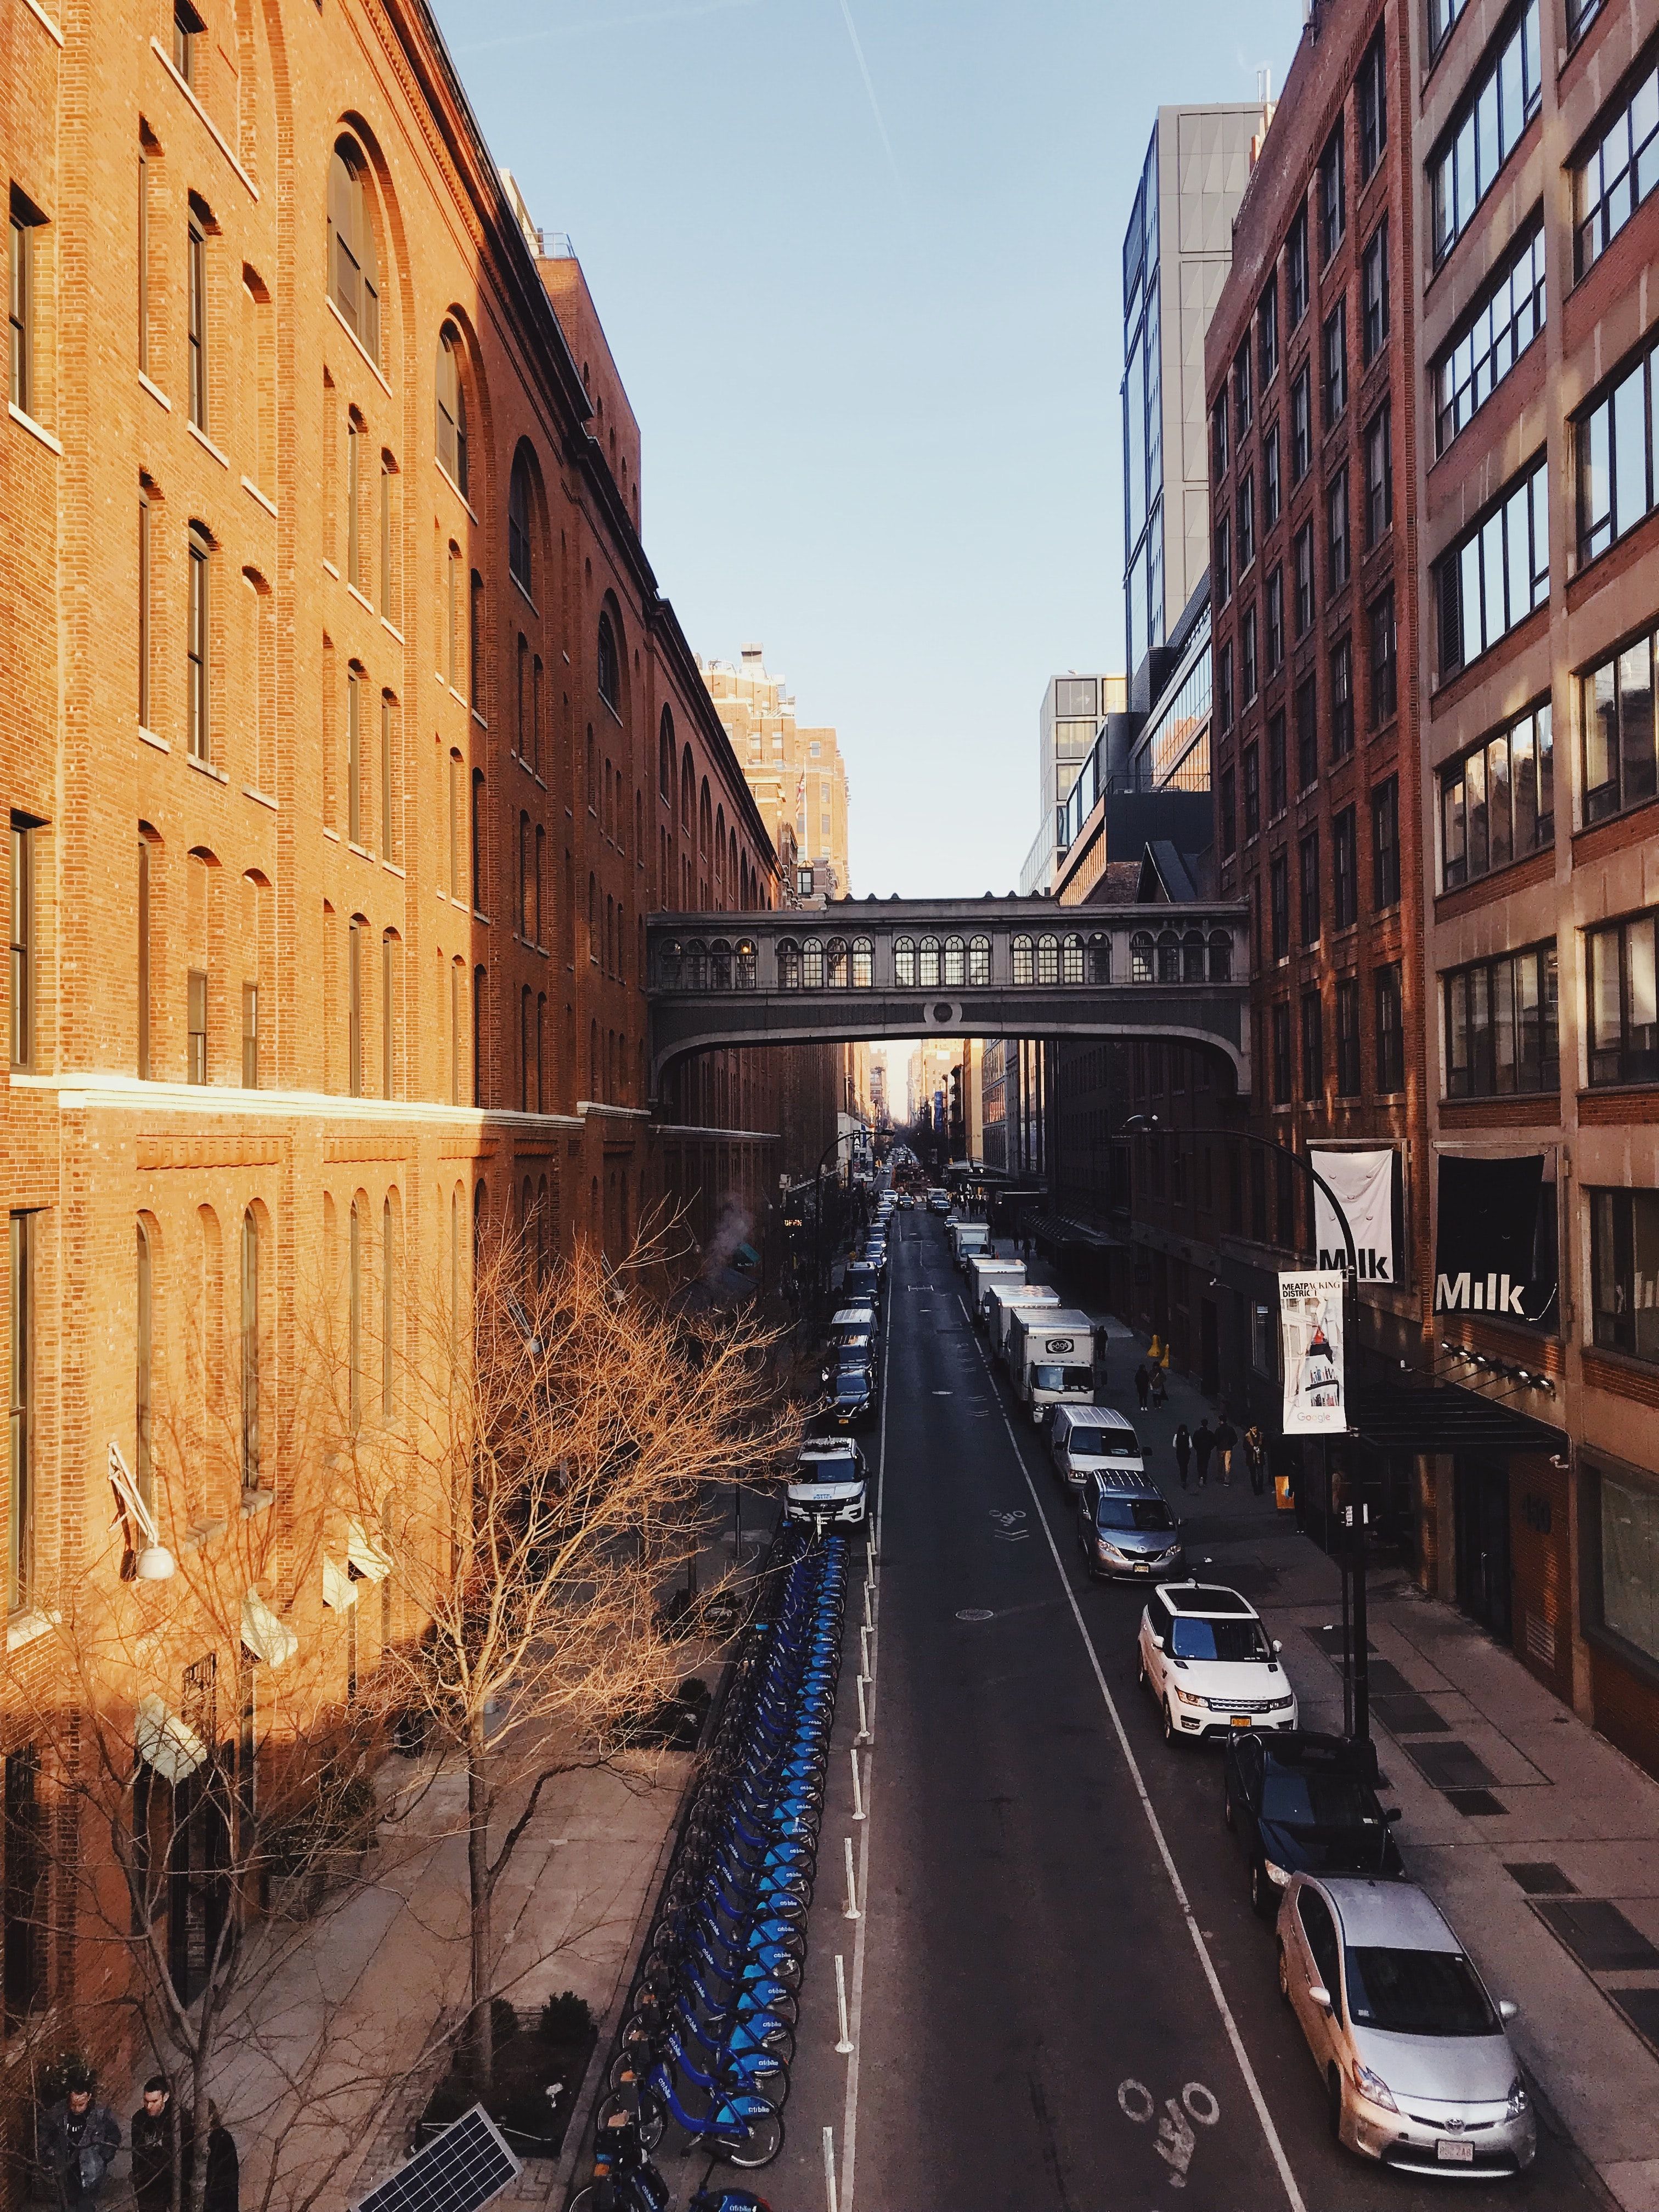 Parking in The High Line, New York City